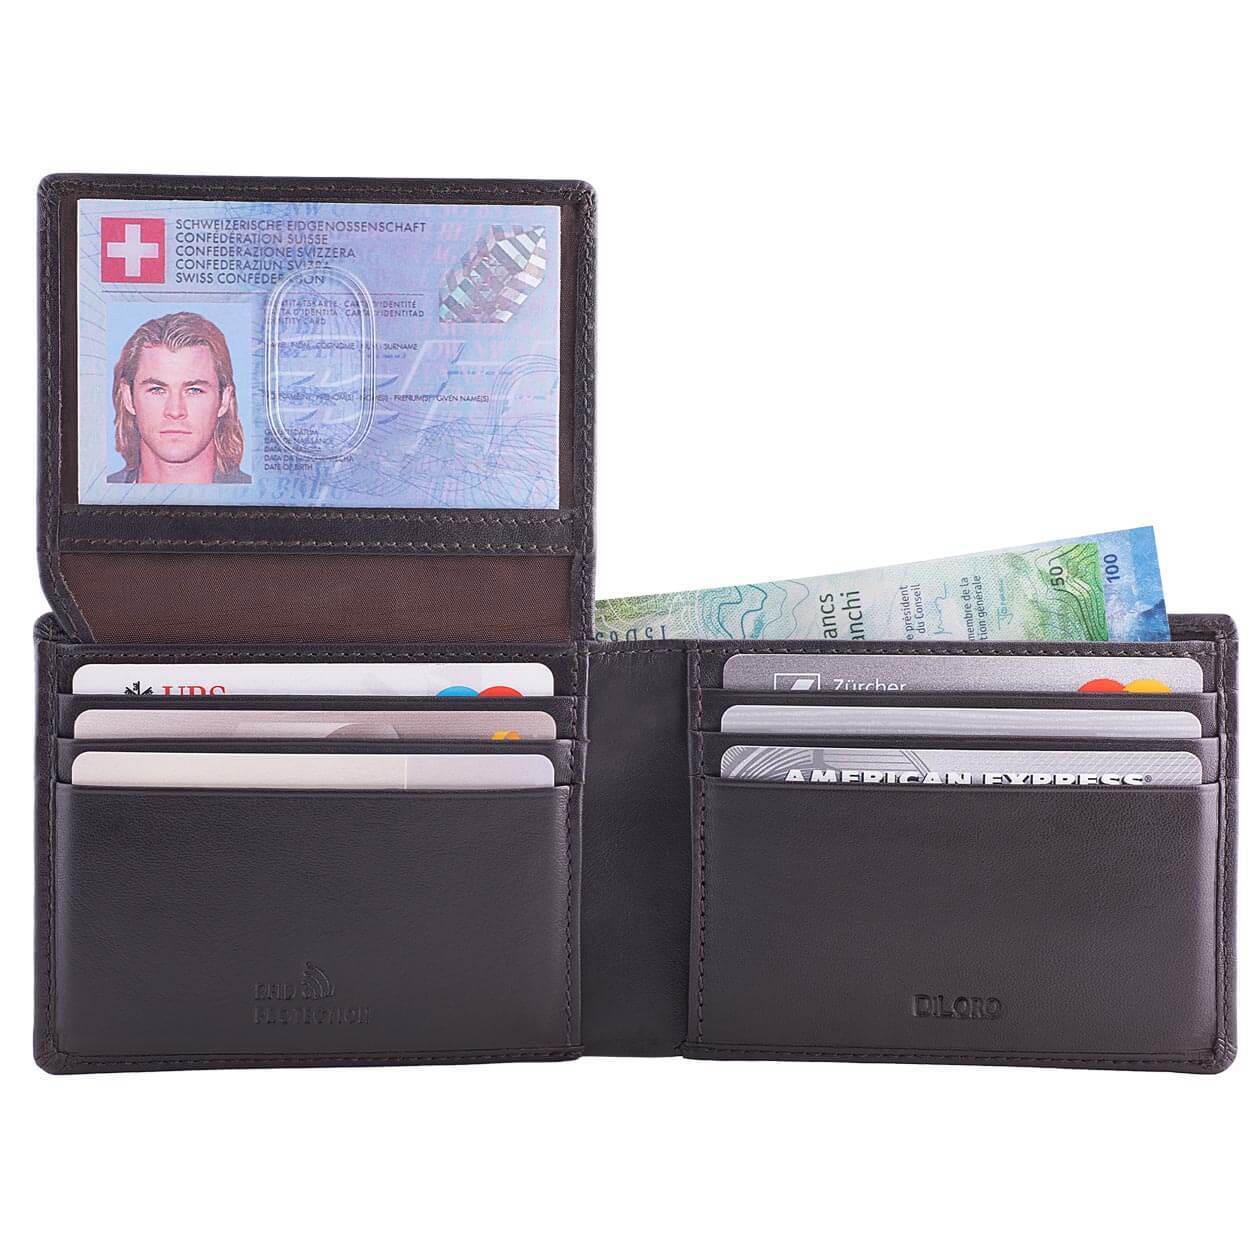 DiLoro Men's Leather Wallet Bifold 2 ID Windows RFID Protection -  Napa Brown Open Inside View ID Up and Cash in Double Billfold (not included)